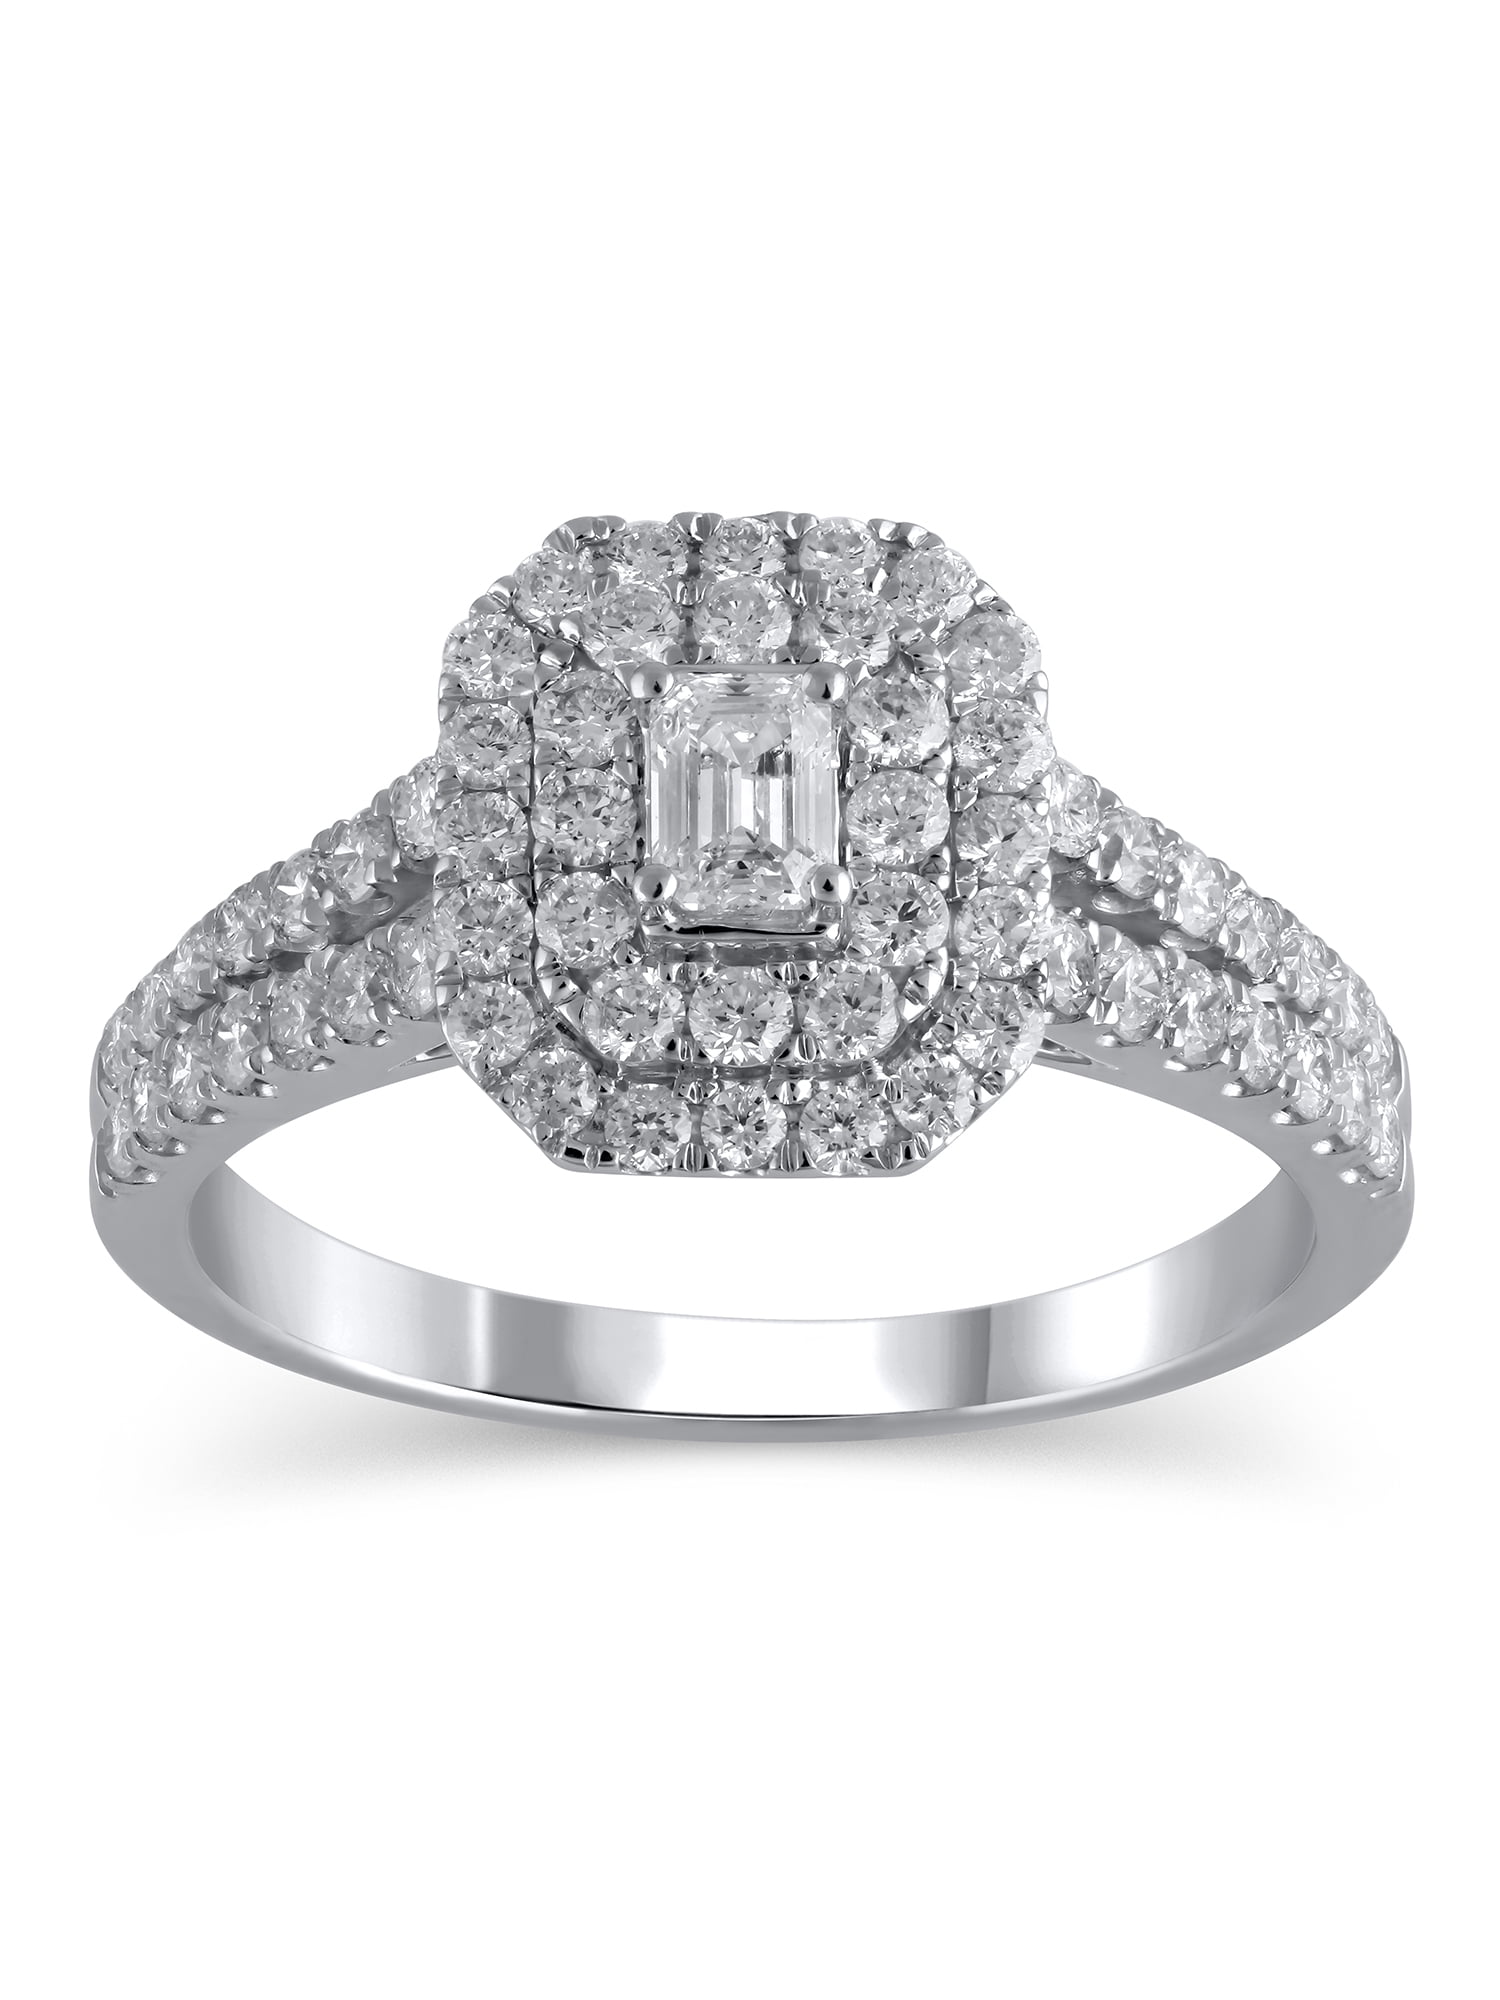 1 Carat T.W. (I2 clarity, H-I color) Brilliance Fine Jewelry Emerald cut Diamond Engagement Ring in 10kt White Gold, Size 7